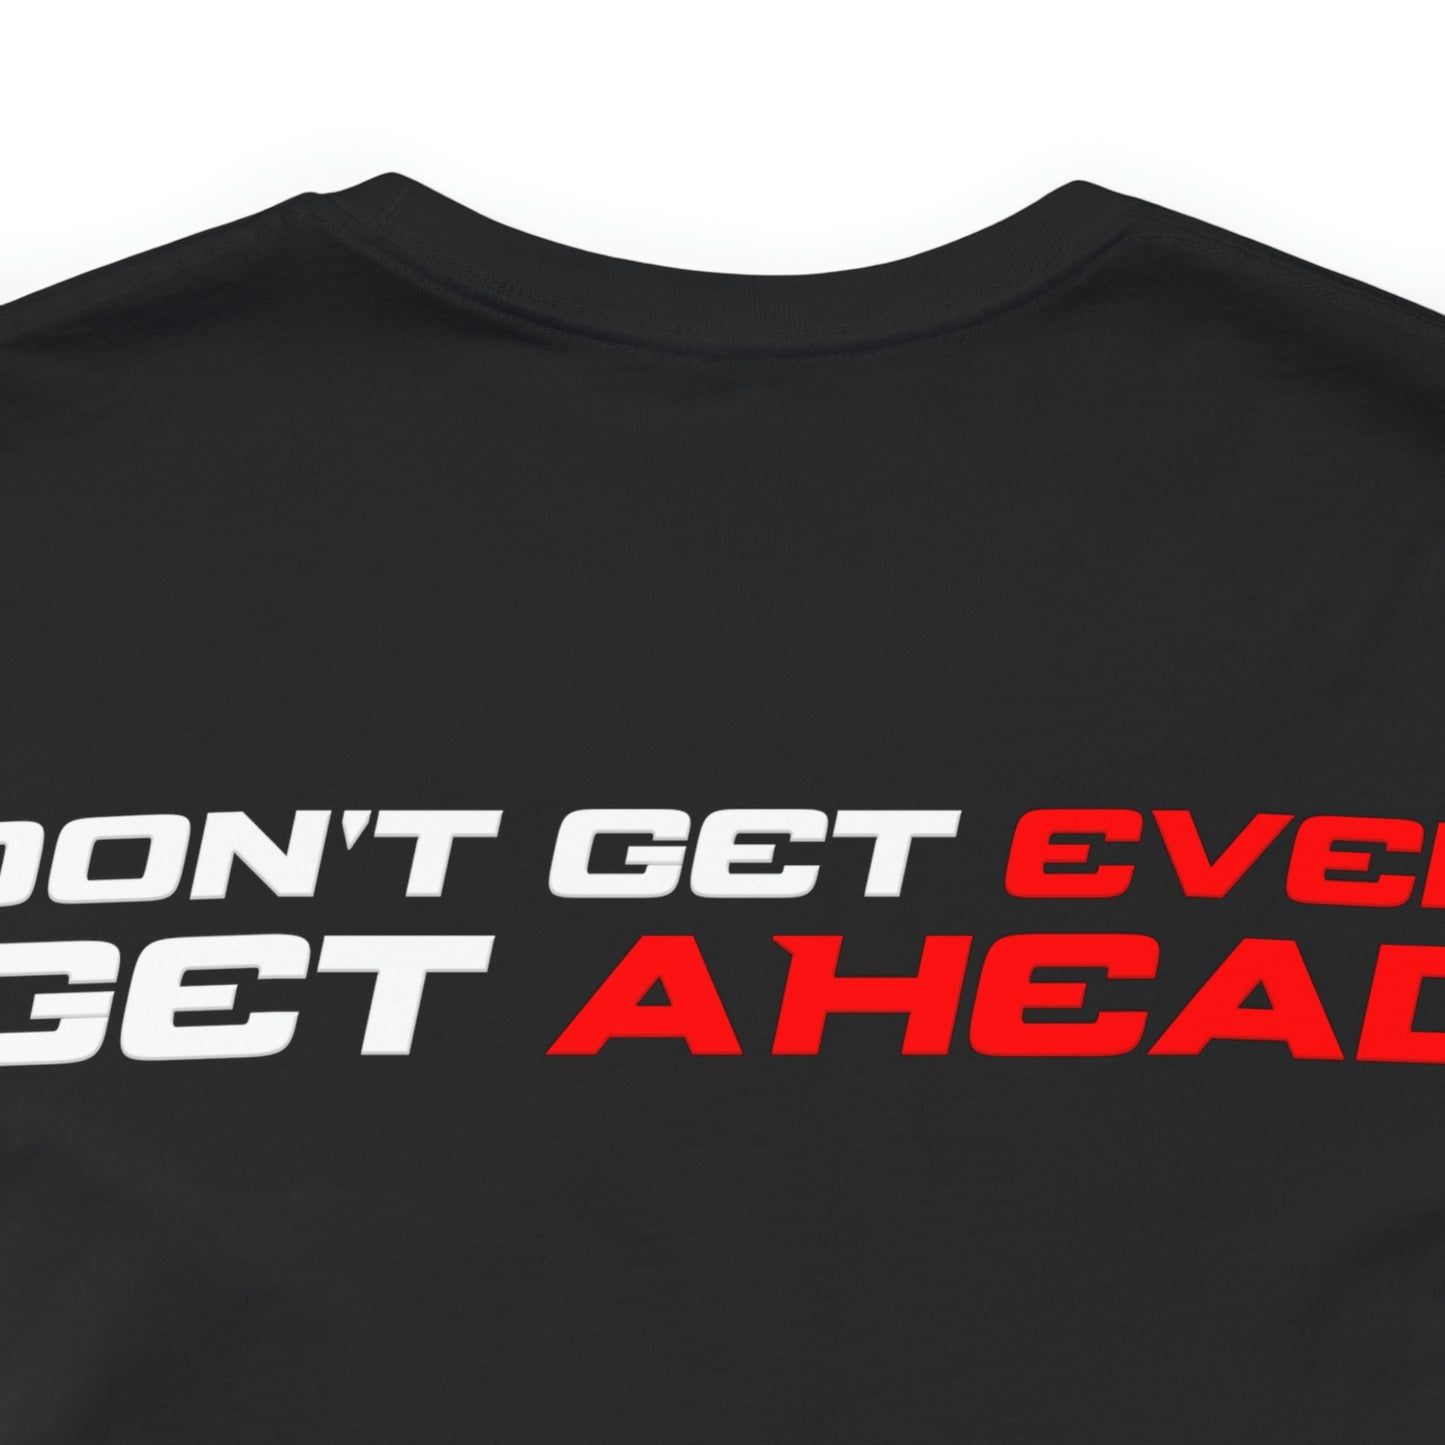 Joey Barkhimer: Don't Get Even Get Ahead Tee